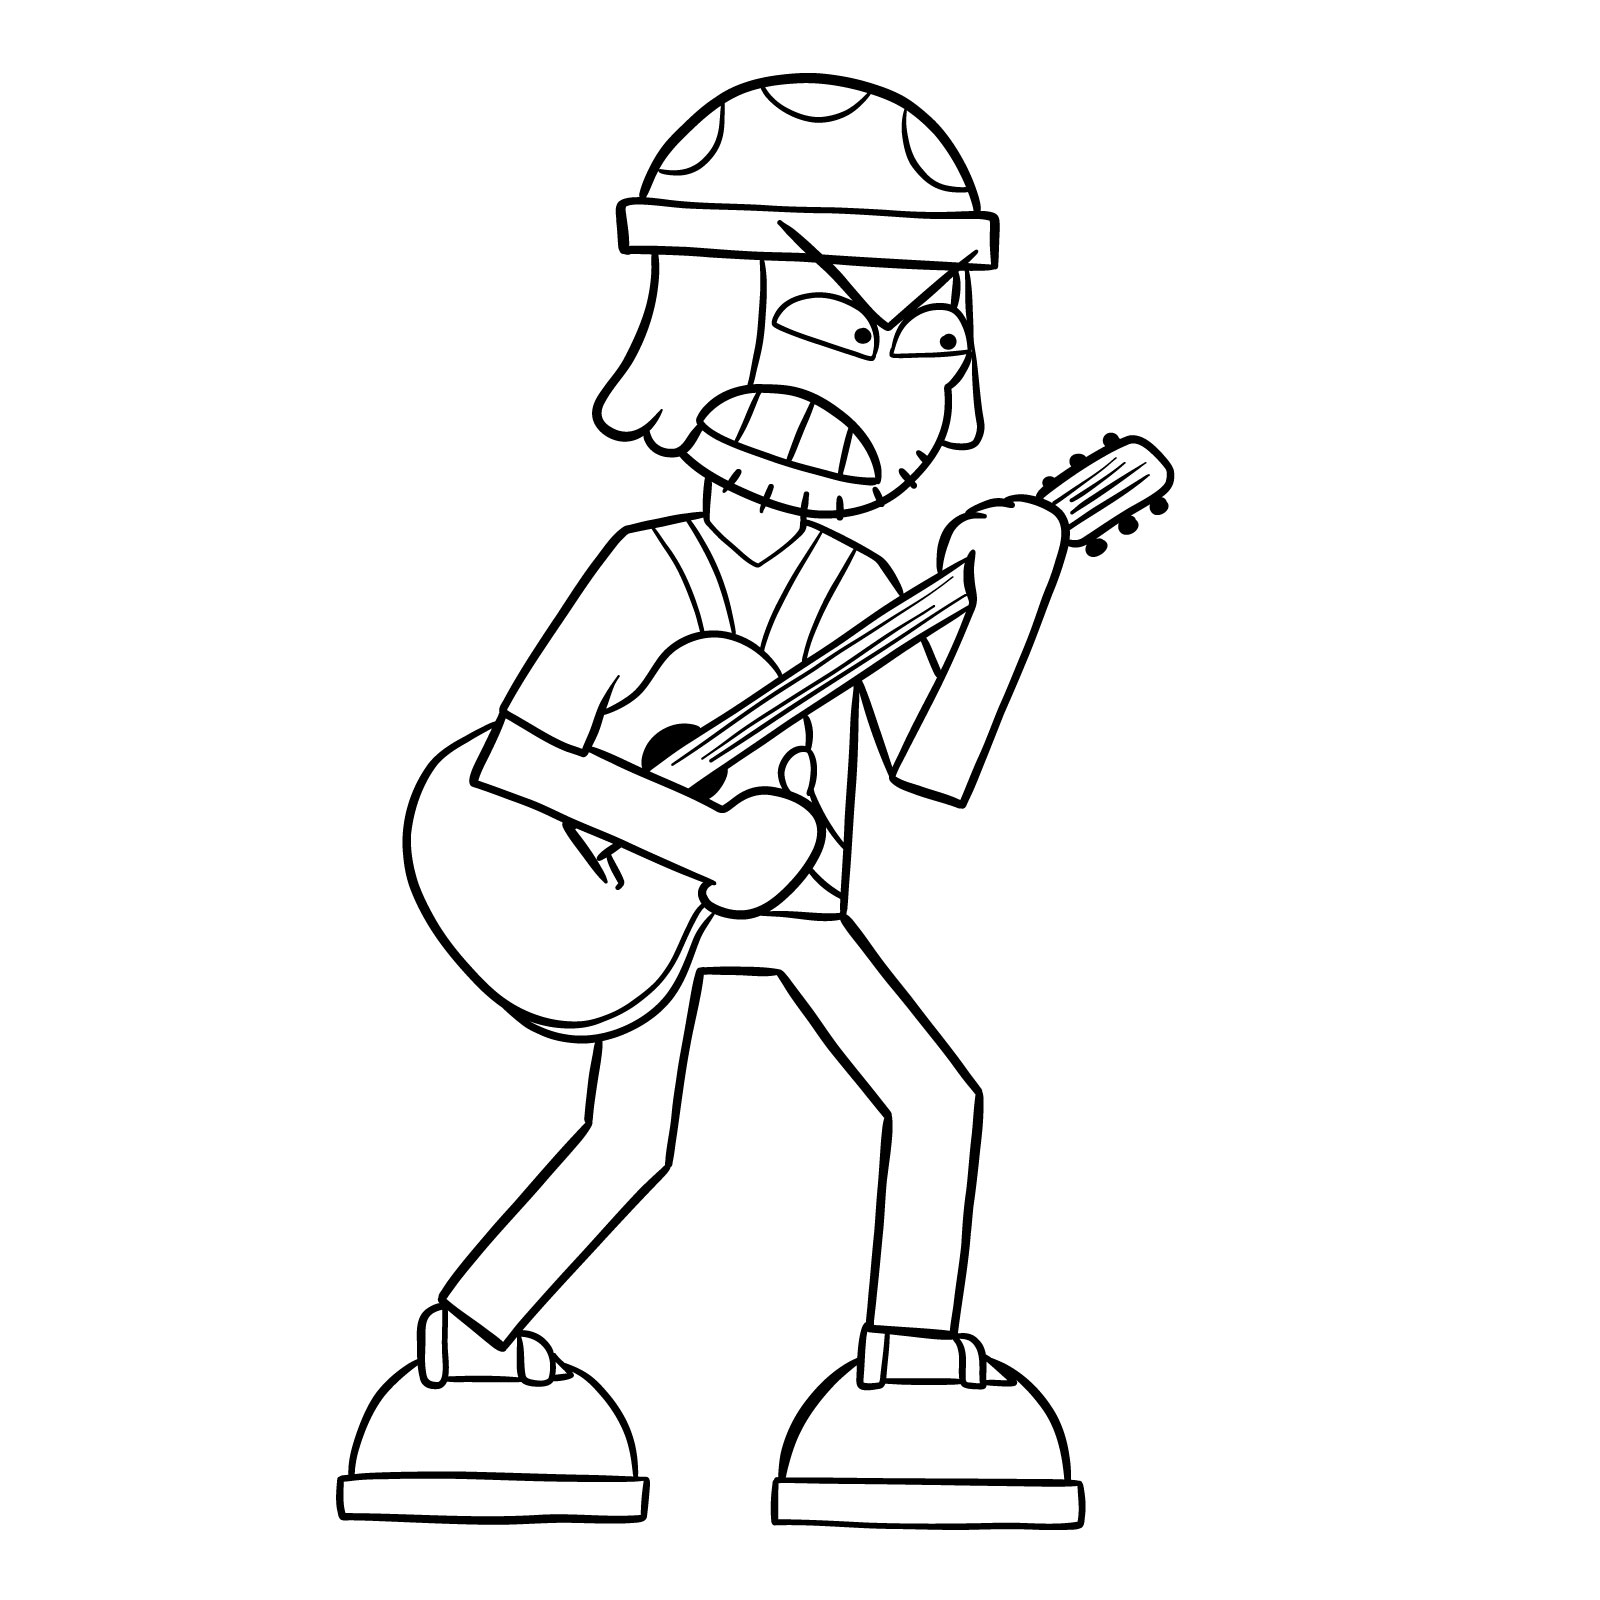 How to draw Suction Cup Man with a guitar - final step